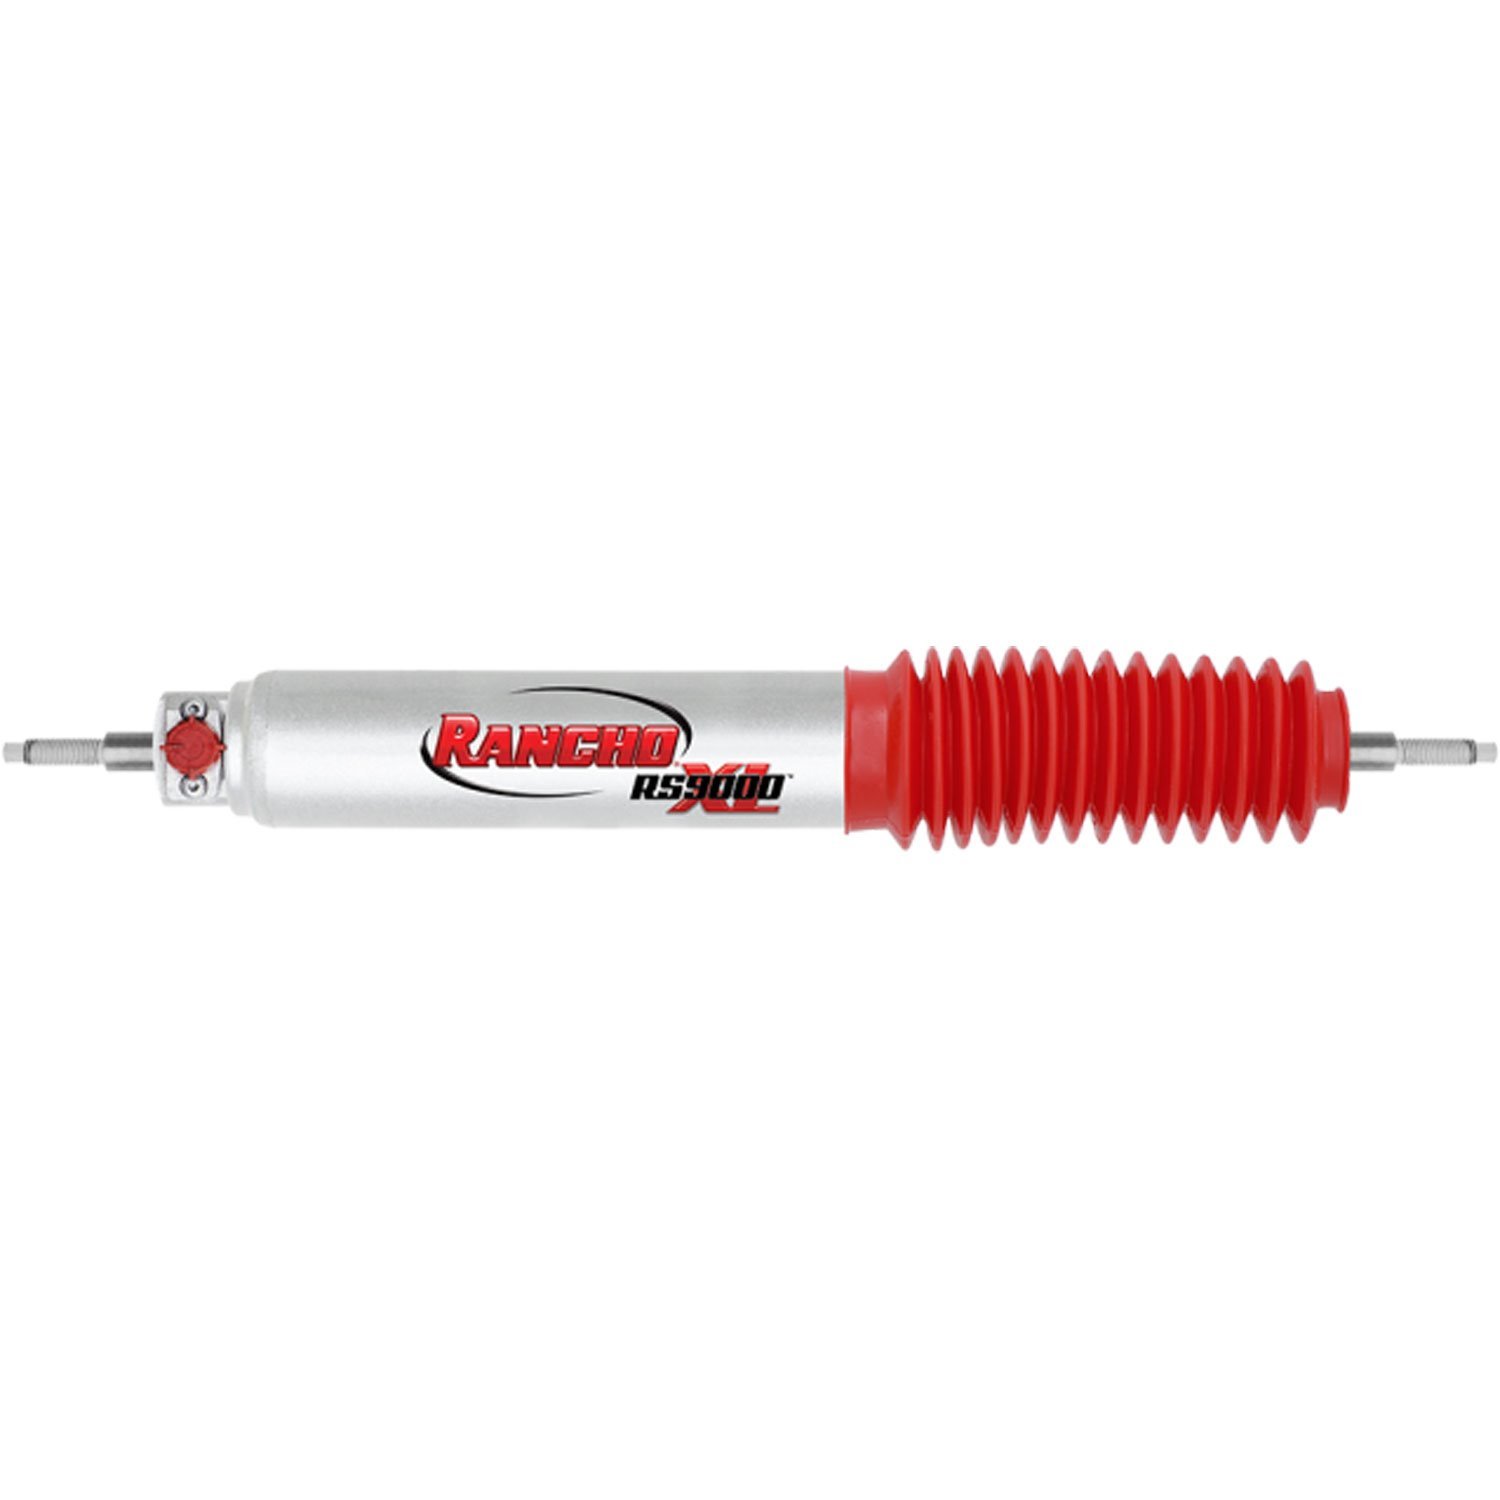 RS9000XL Front Shock Absorber Fits Ford F150/F250